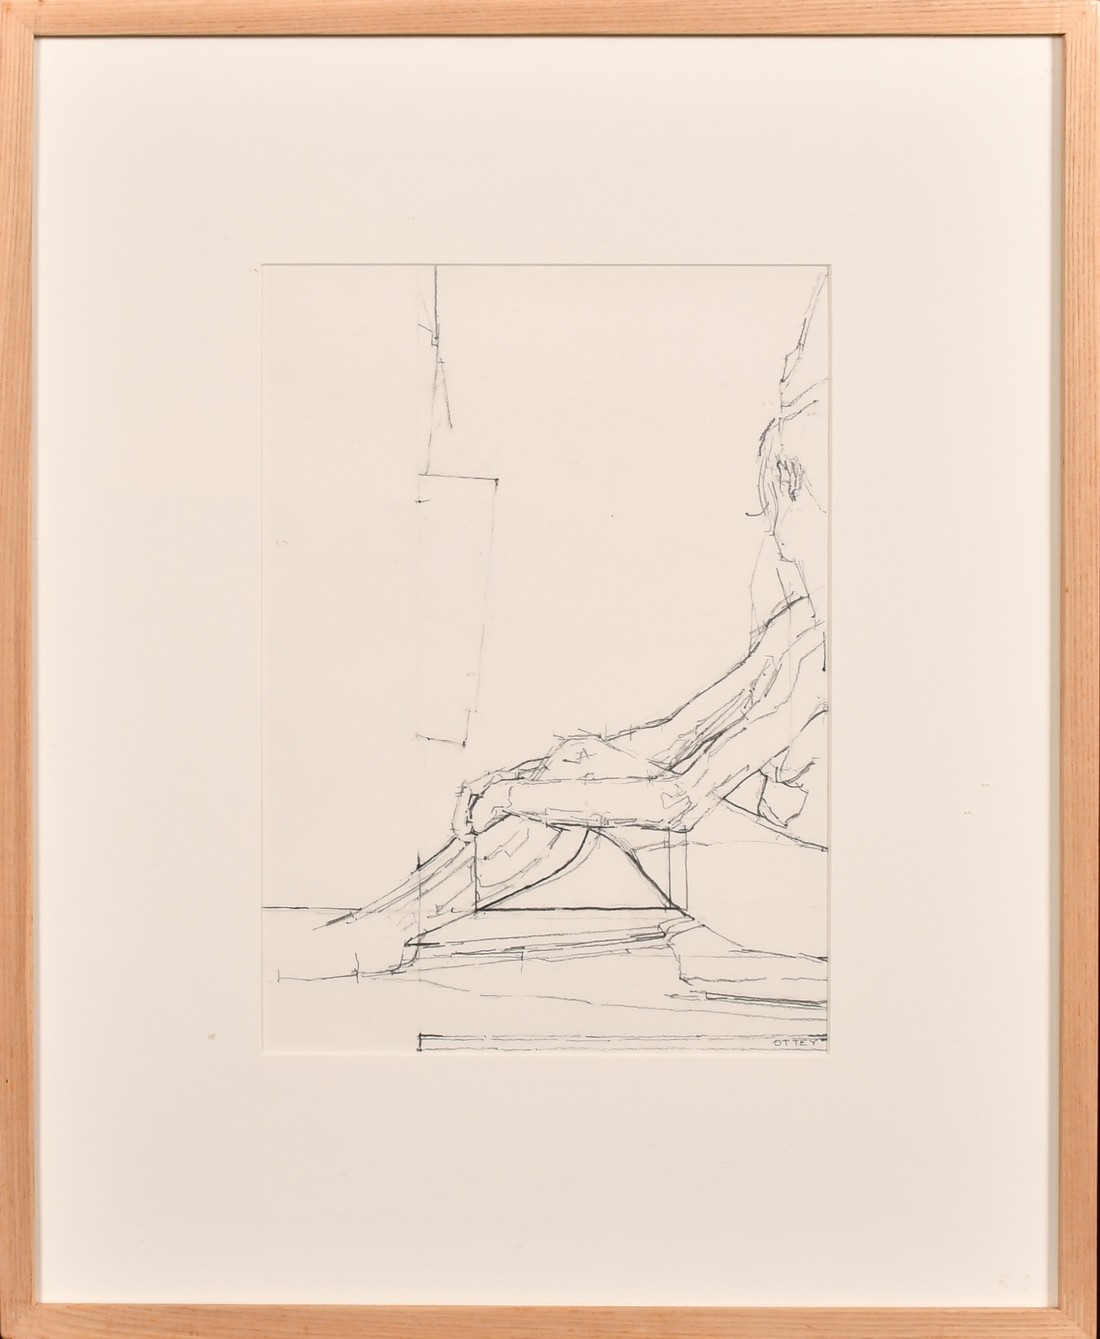 Piers Ottey (20th Century), two charcoal life drawings, one 13" x 9" (33 x 23cm), the other 8" x - Image 2 of 5